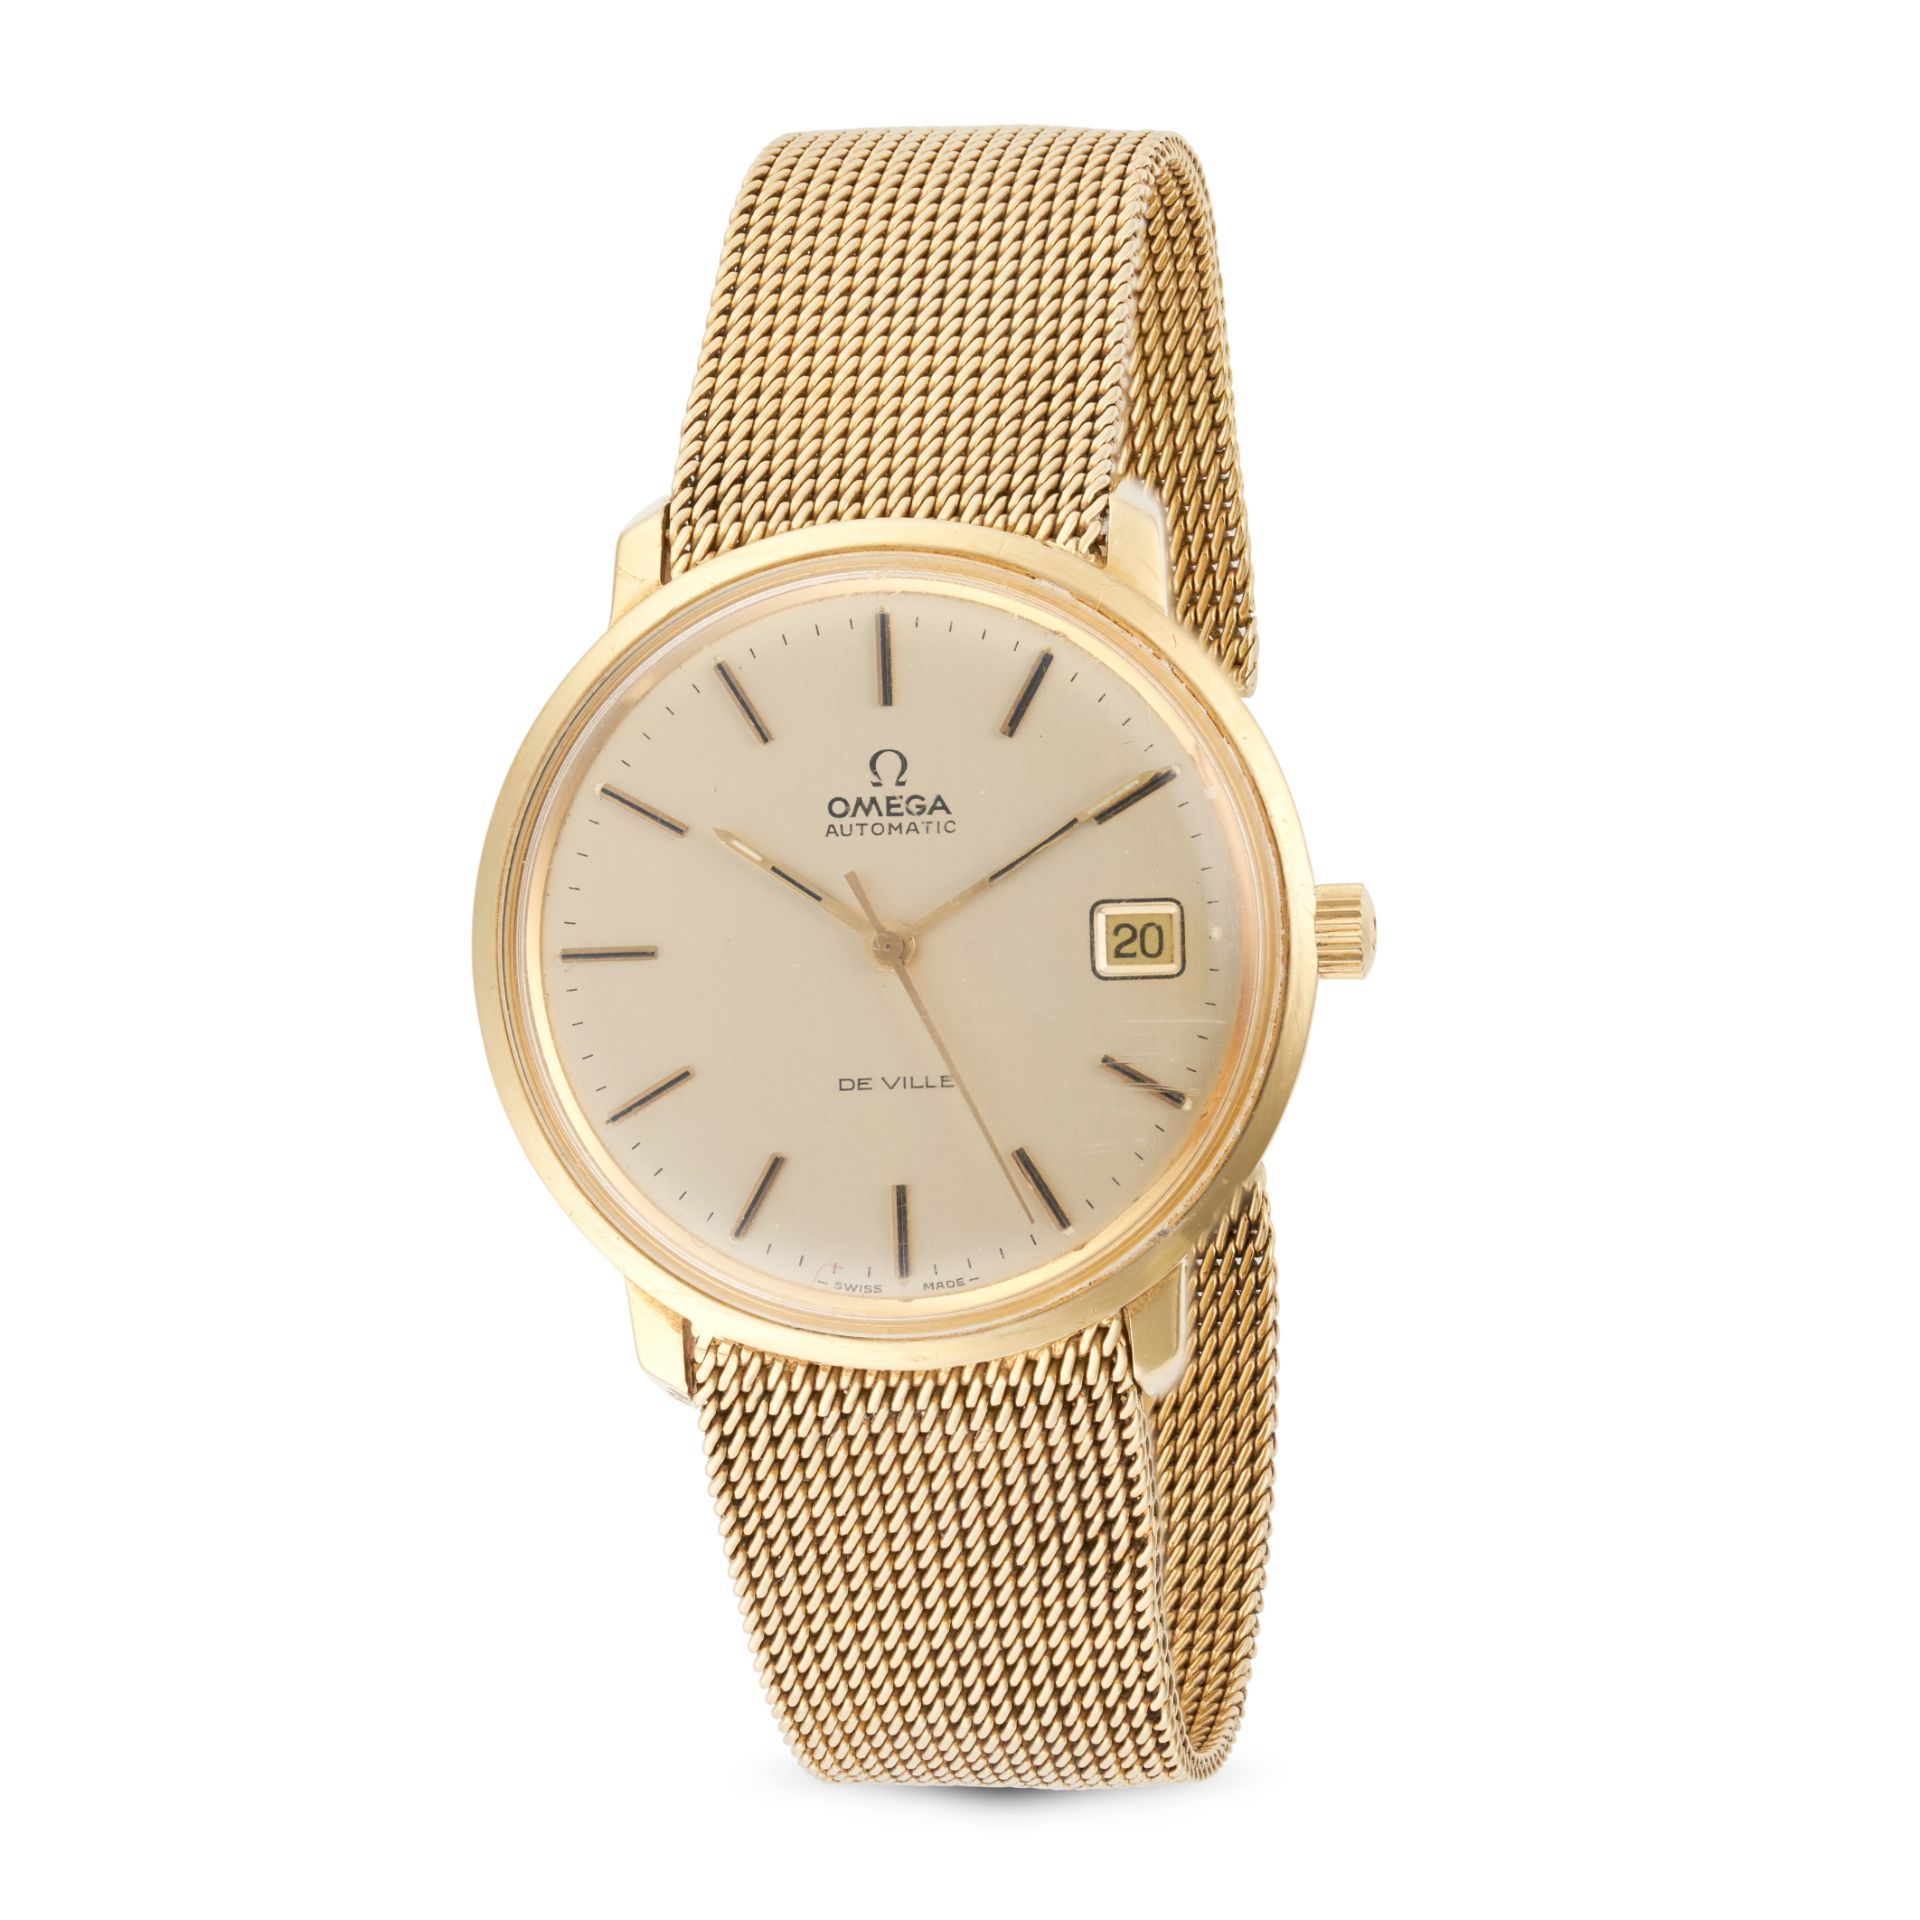 OMEGA, A VINTAGE AUTOMATIC DE VILLE WRISTWATCH in 18ct yellow gold, champagne dial with applied b...